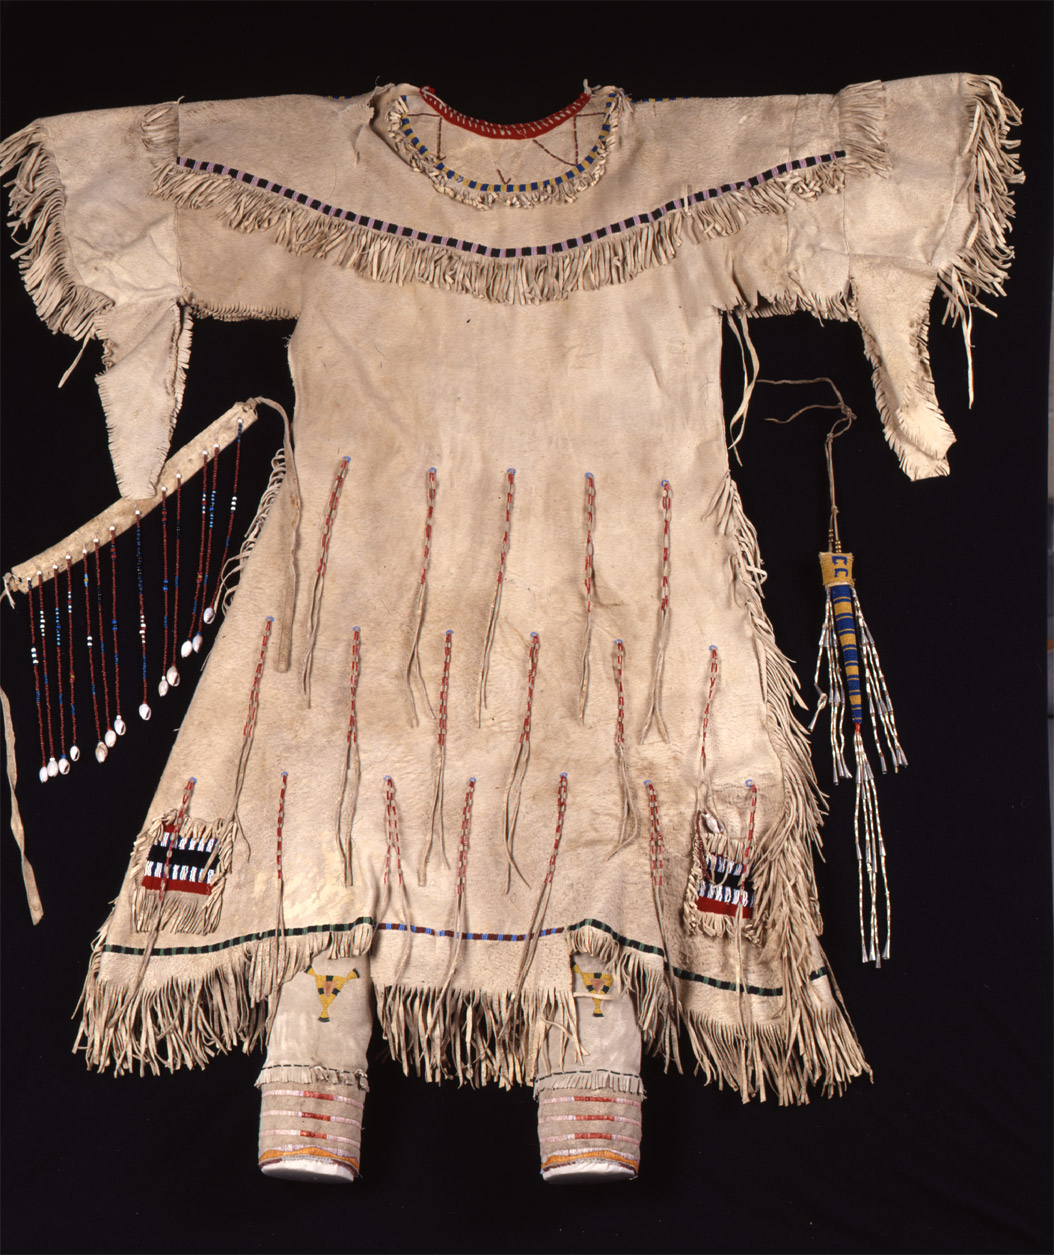 “Young woman’s buckskin dress, owned by Spotted Crow Woman.”   This dress was made by Spotted Crow Woman.  A few years later, Mink (Hannah Leavings Grant) wore this dress when she posed for the statue of Sakakawea that now stands in front of the State Historical Society of North Dakota Heritage Center.  The dress was the most highly valued item in the collection at $85. SHSND Museum 01442